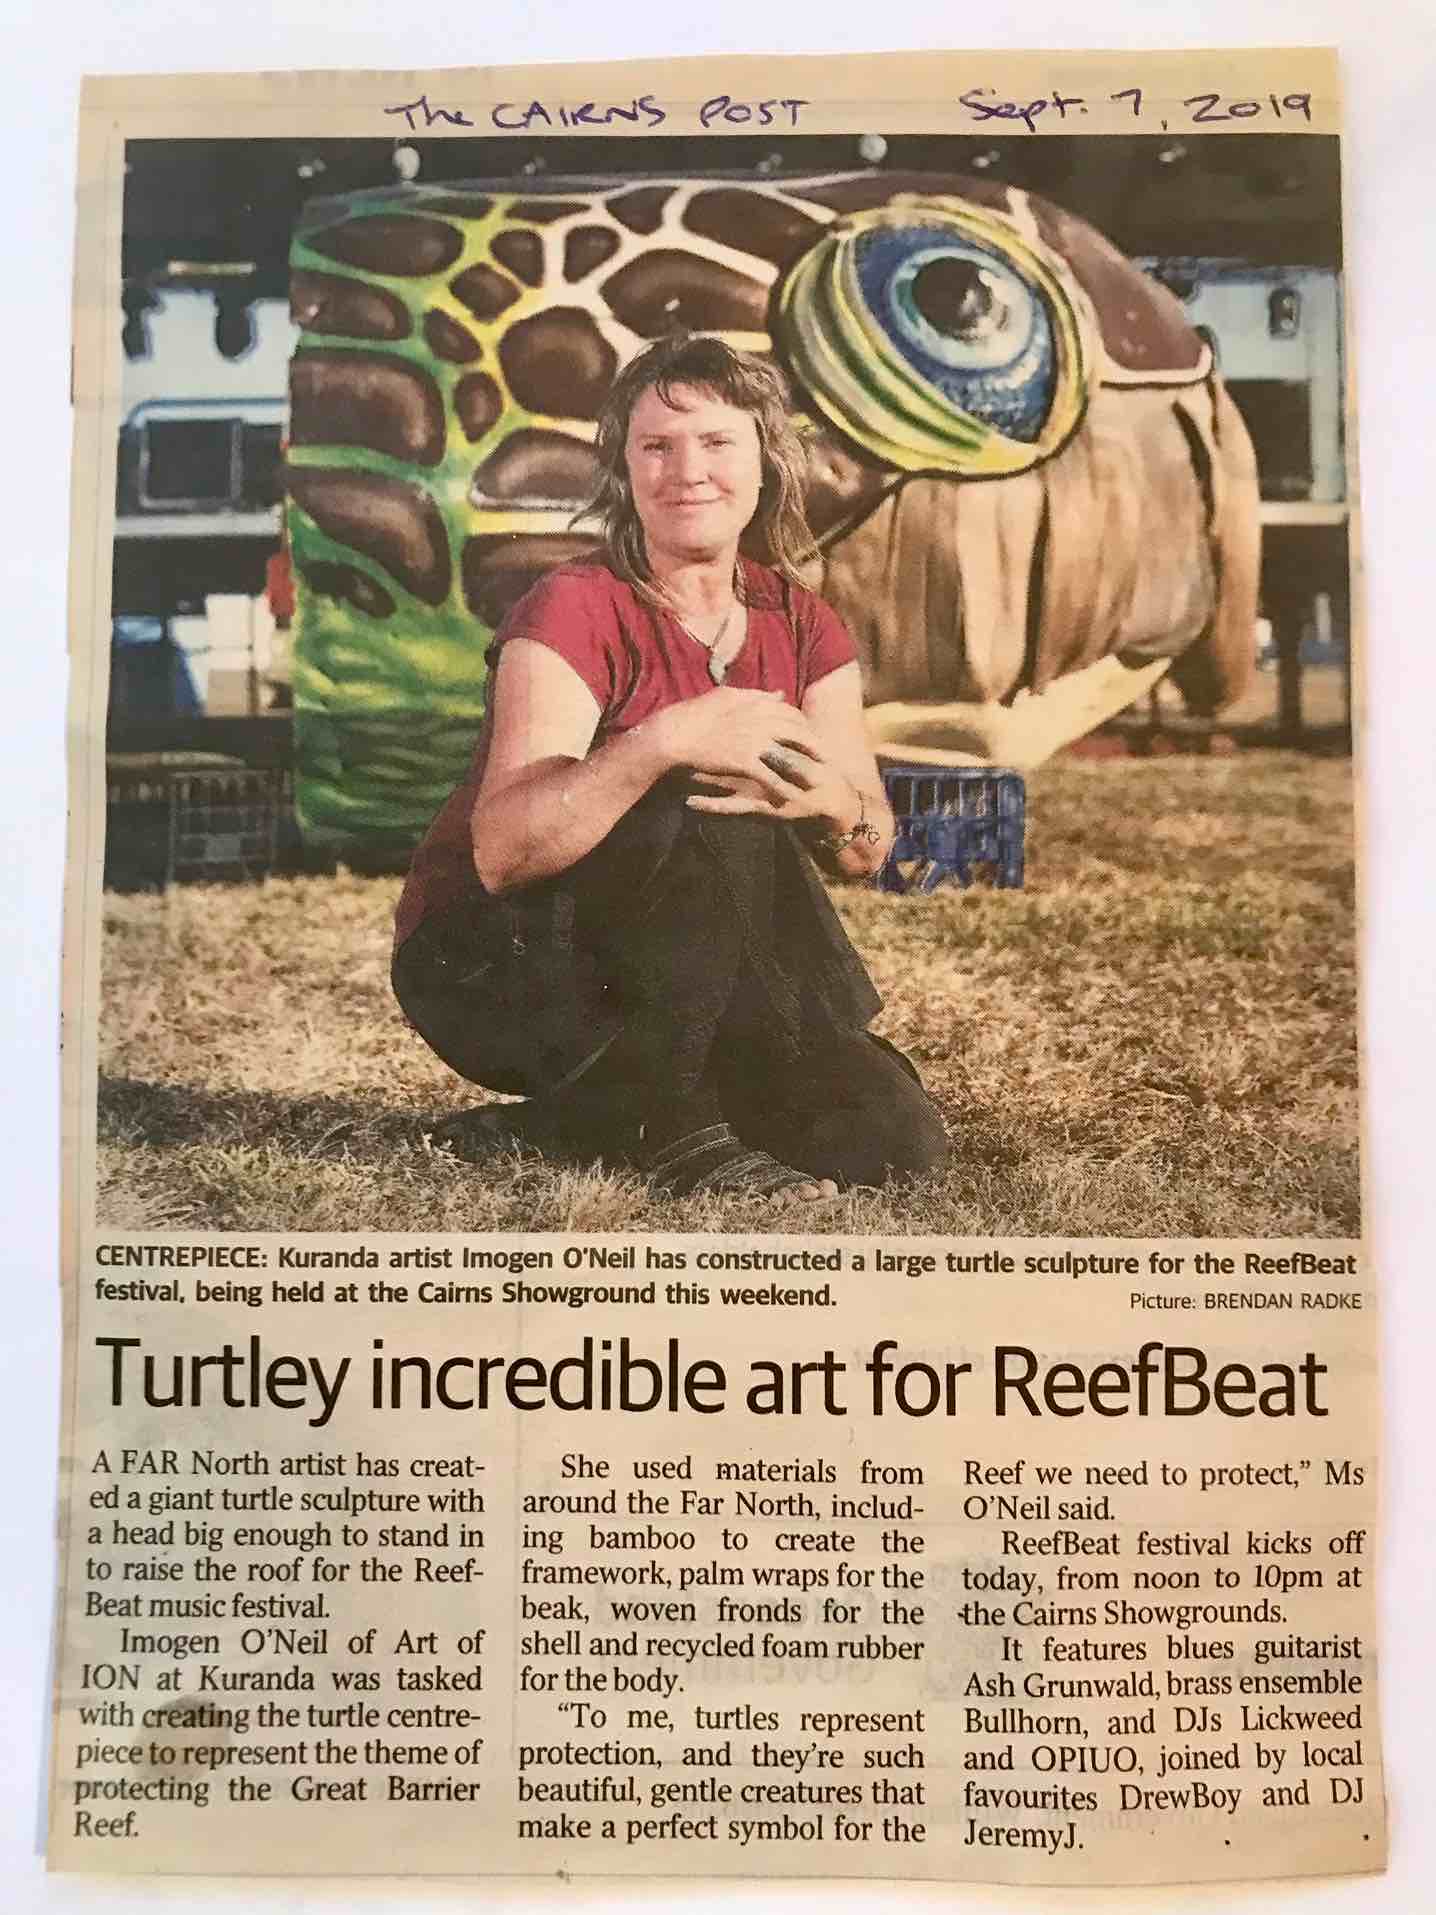 Art of ION in The Cairns Post Sept. 2019